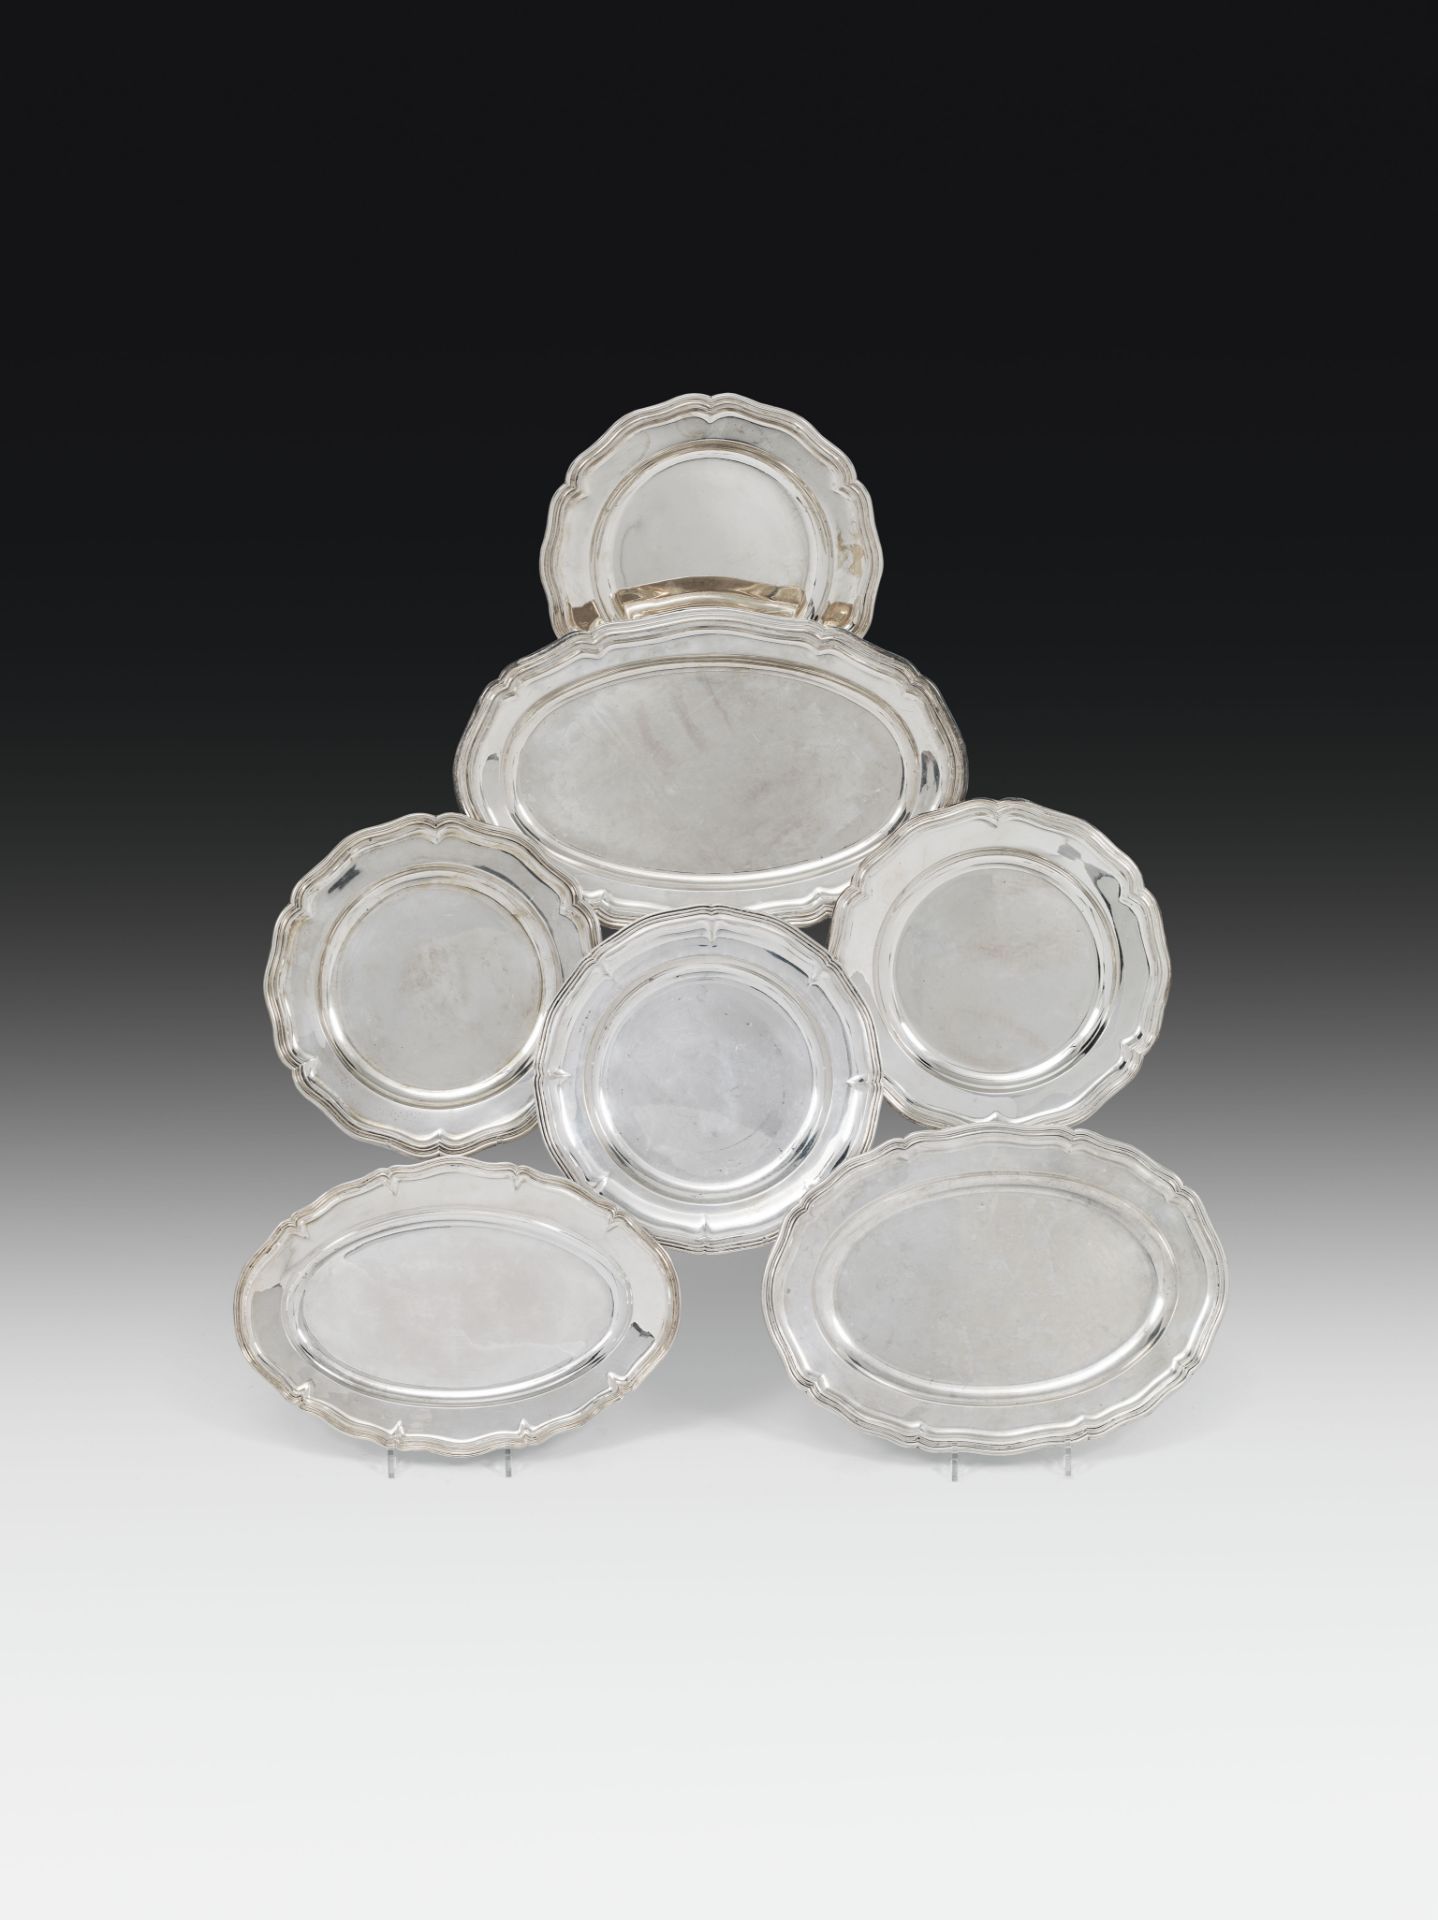 4 Plates, 3 trayssilver; mixed lot with 7 pieces; all pieces marked: Vienna Diana hallmark and